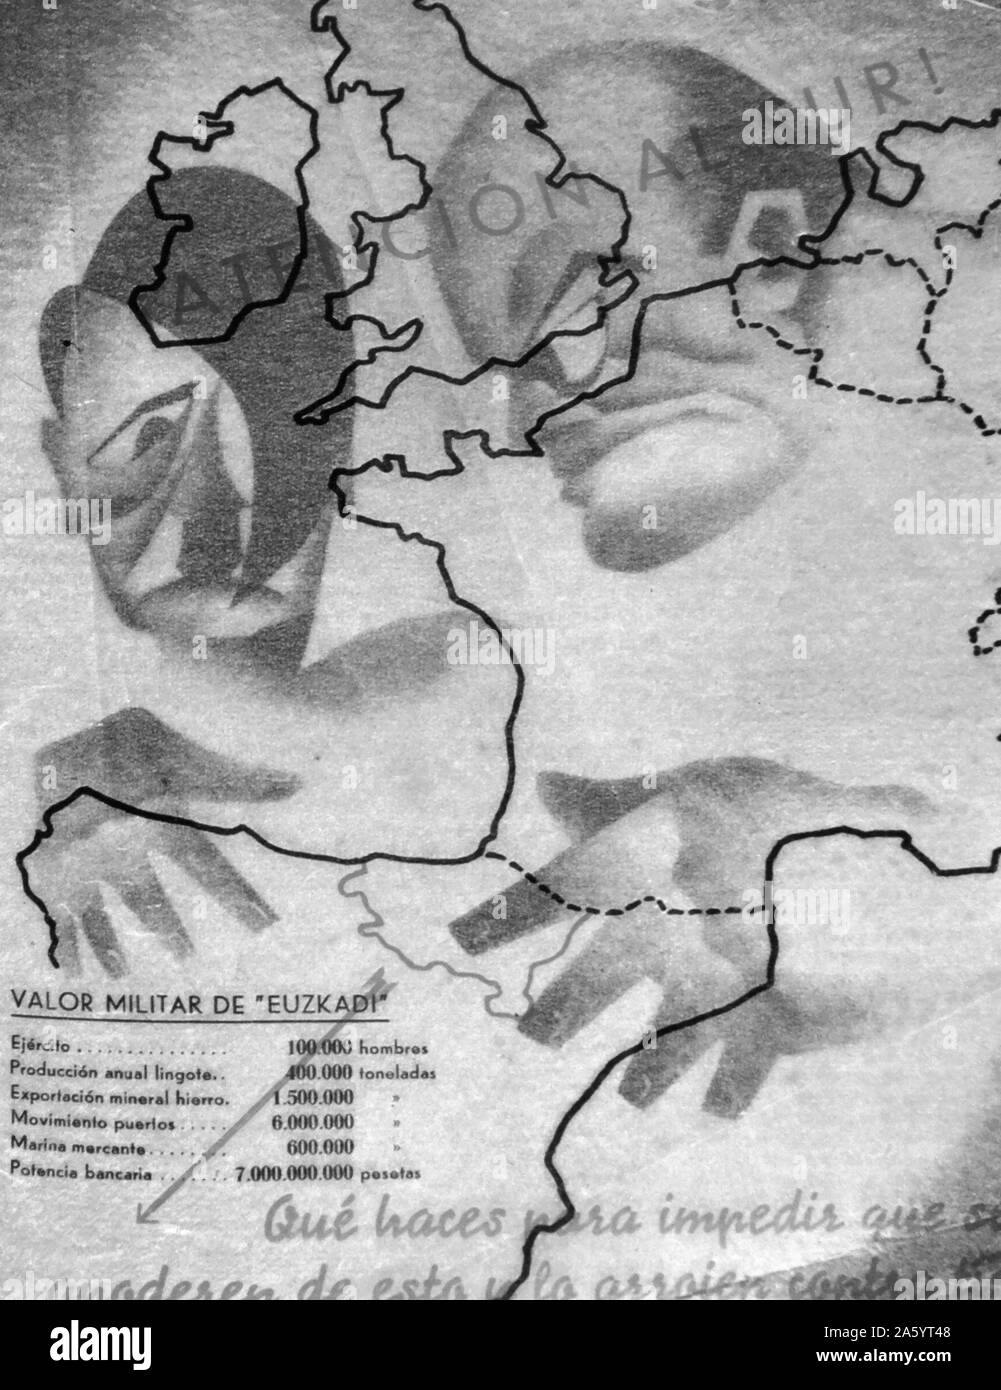 Spanish Civil War: Anti-fascisty propaganda depicting the menace of Mussolini and Hitler and the advance of fascism towards Spain Stock Photo